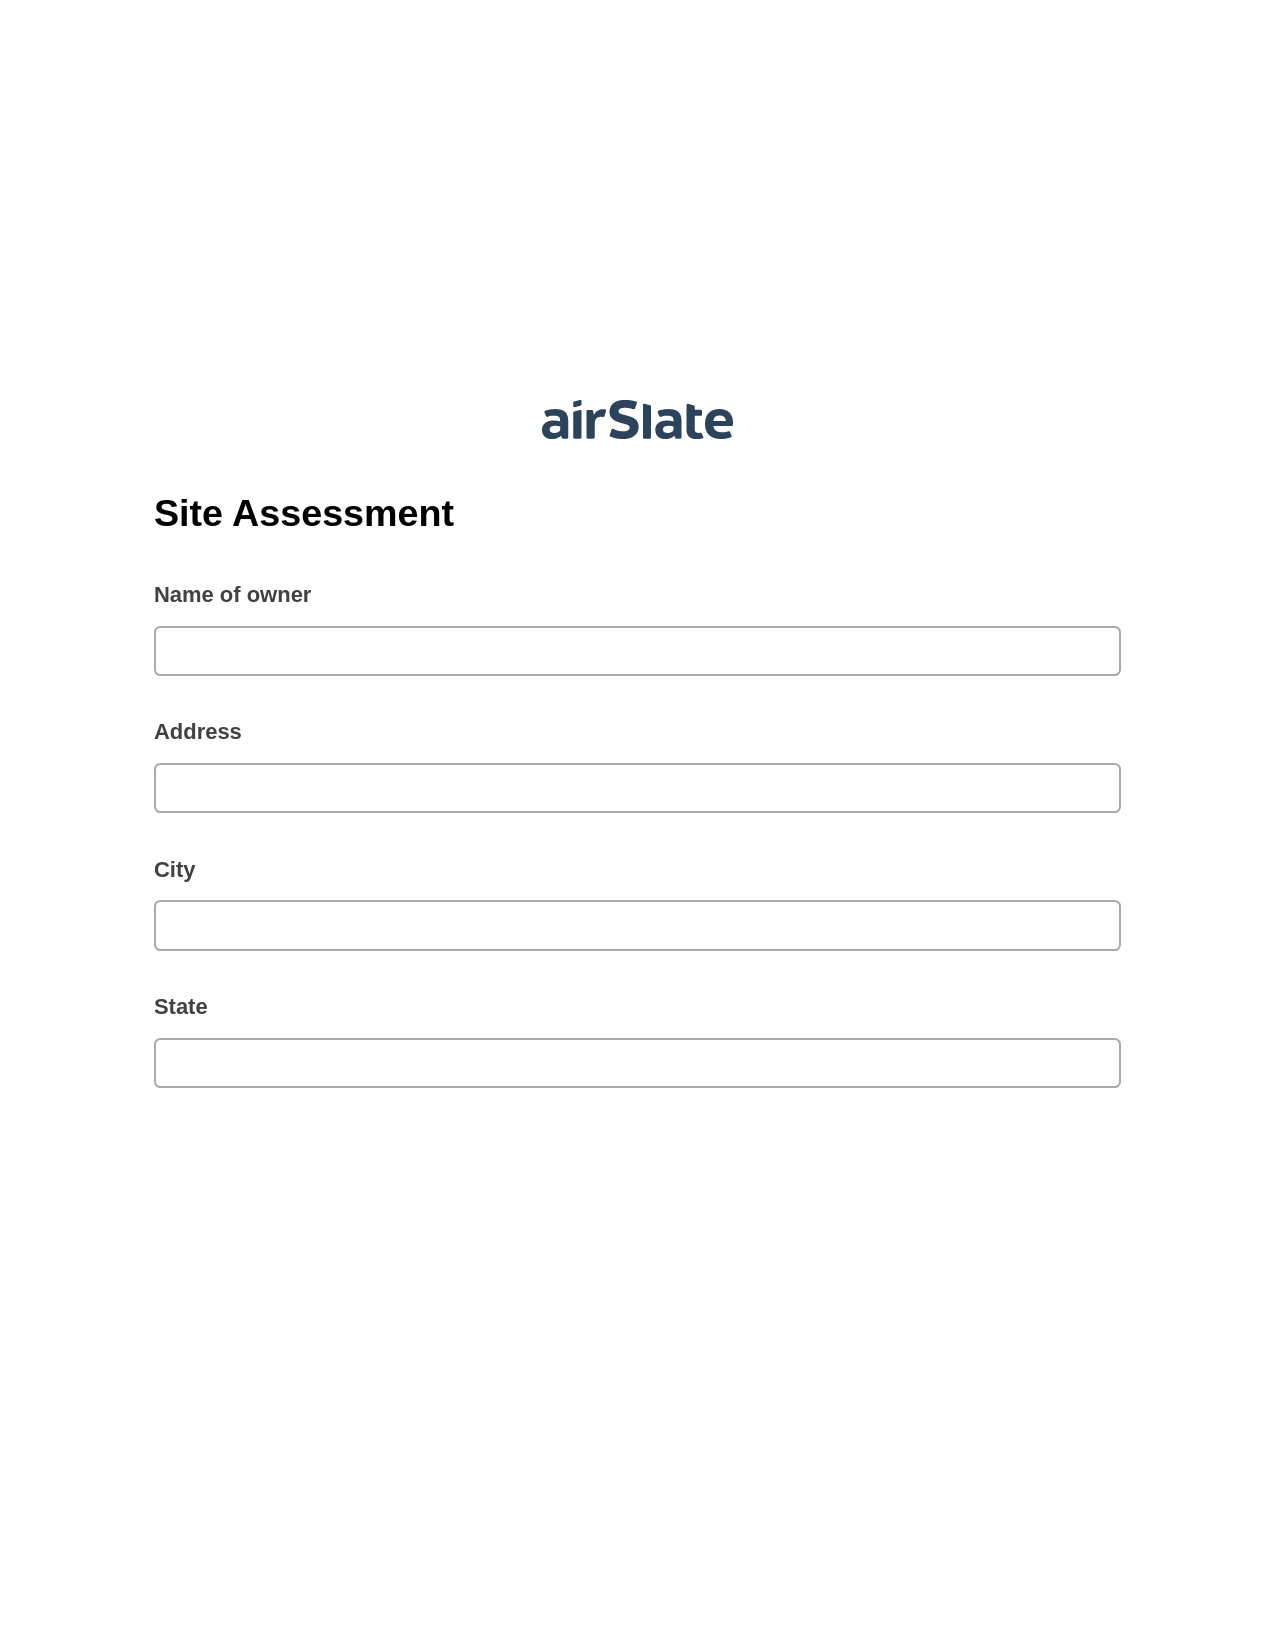 Site Assessment Pre-fill from Google Sheet Dropdown Options Bot, Create MS Dynamics 365 Records Bot, Webhook Postfinish Bot